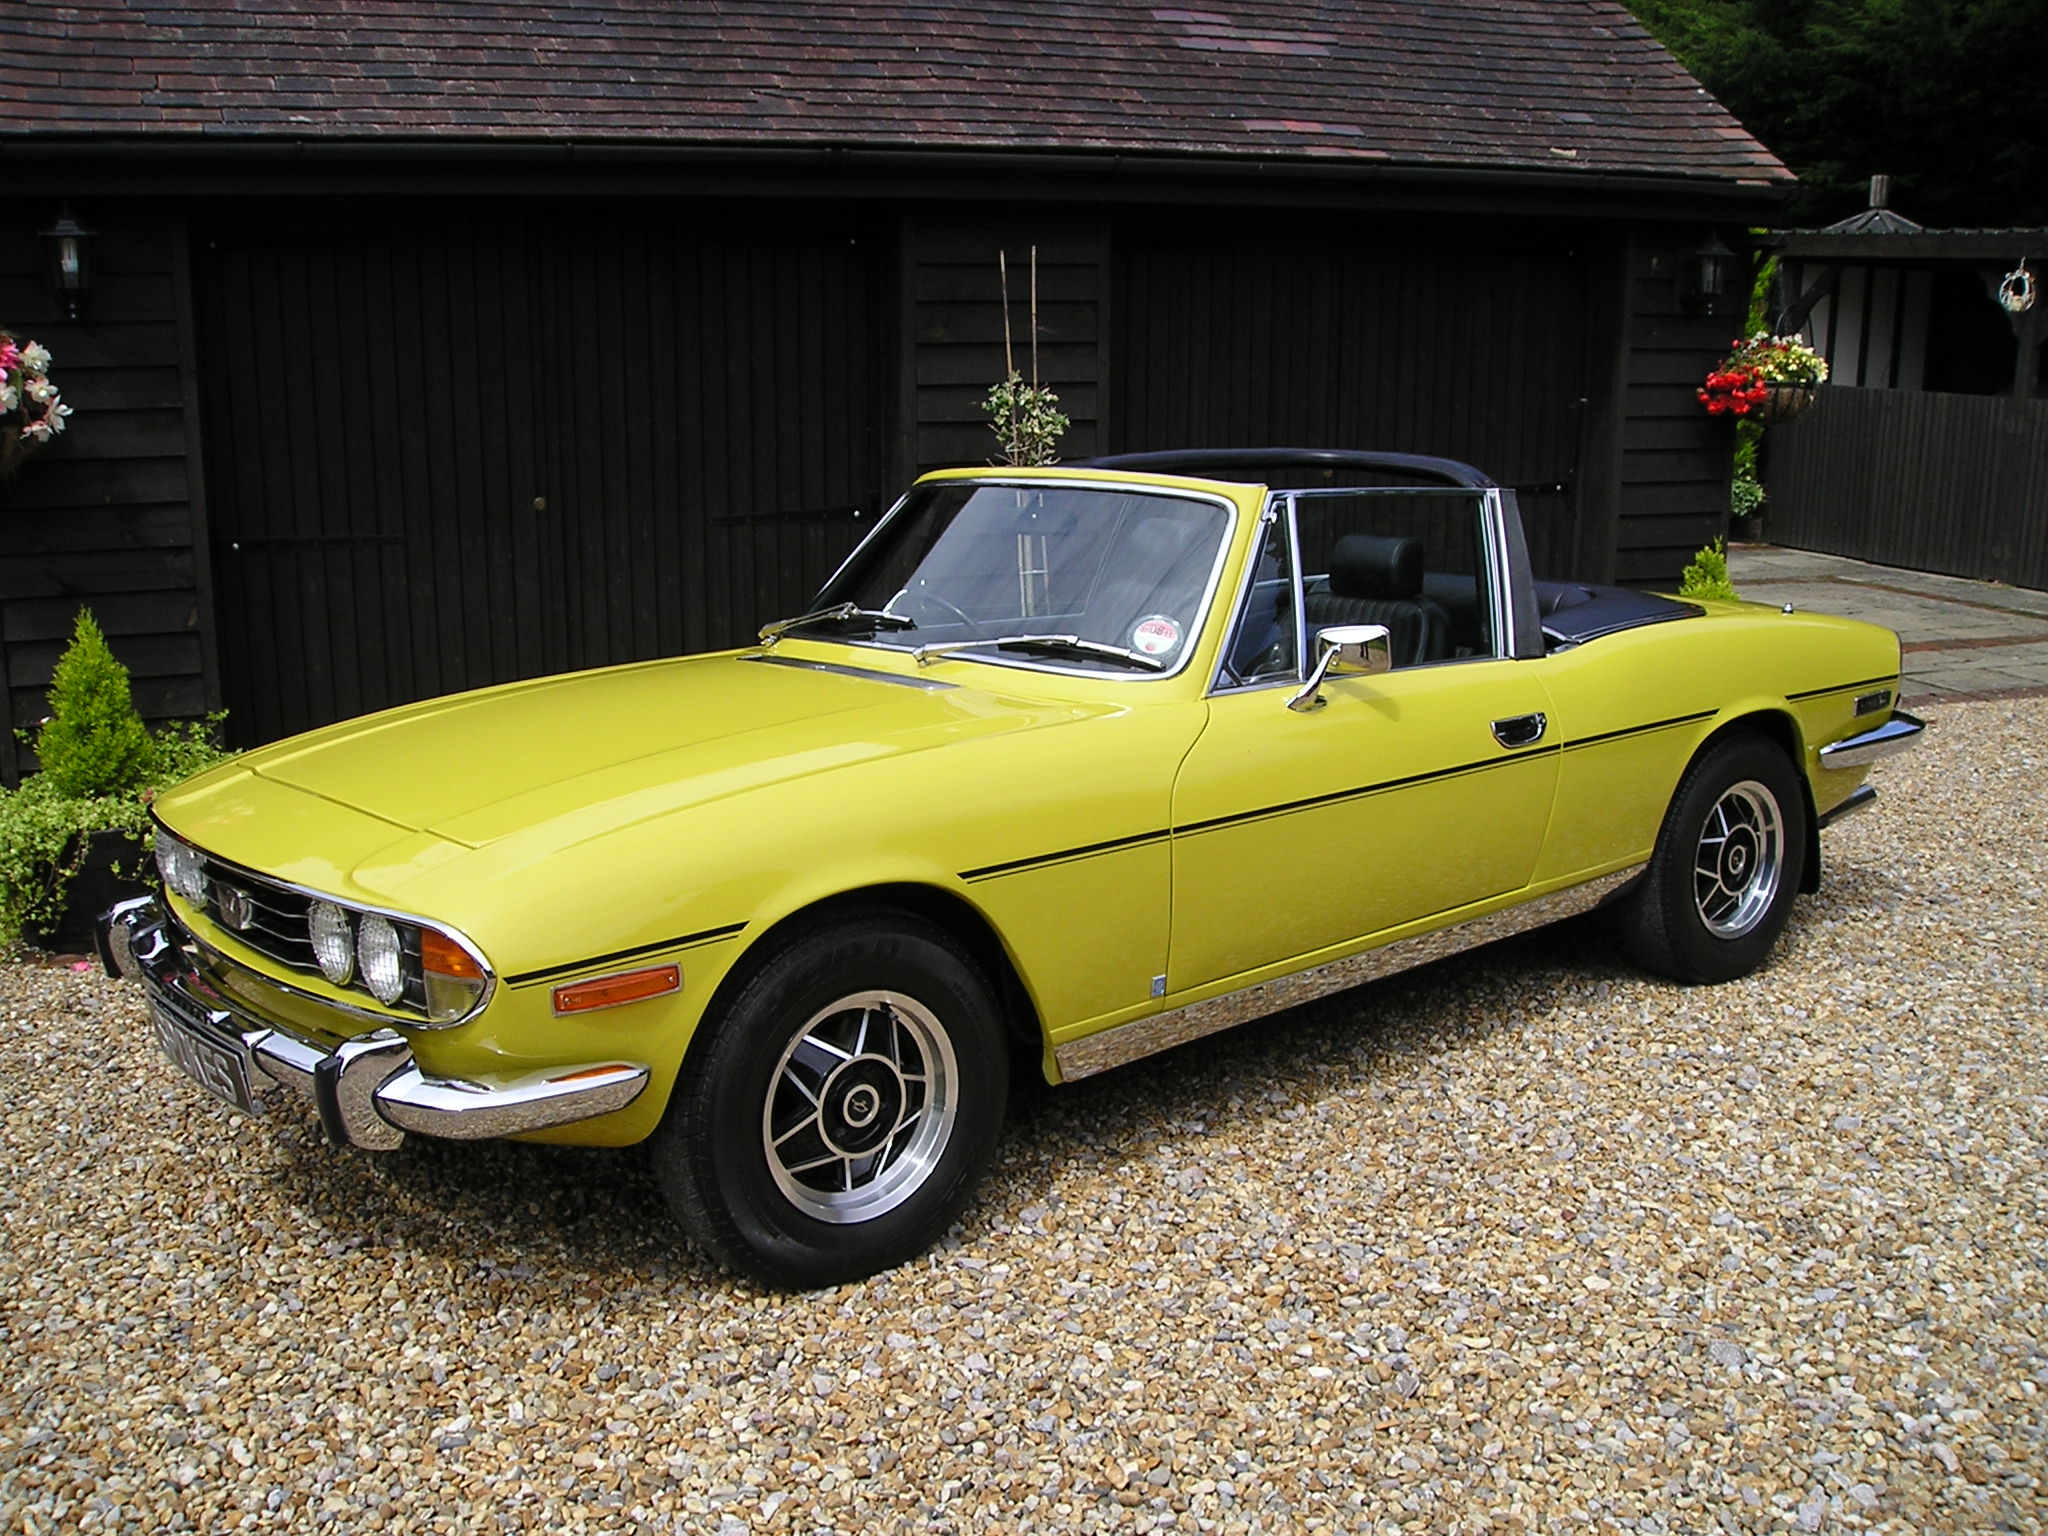 vehicles, triumph stag, stag